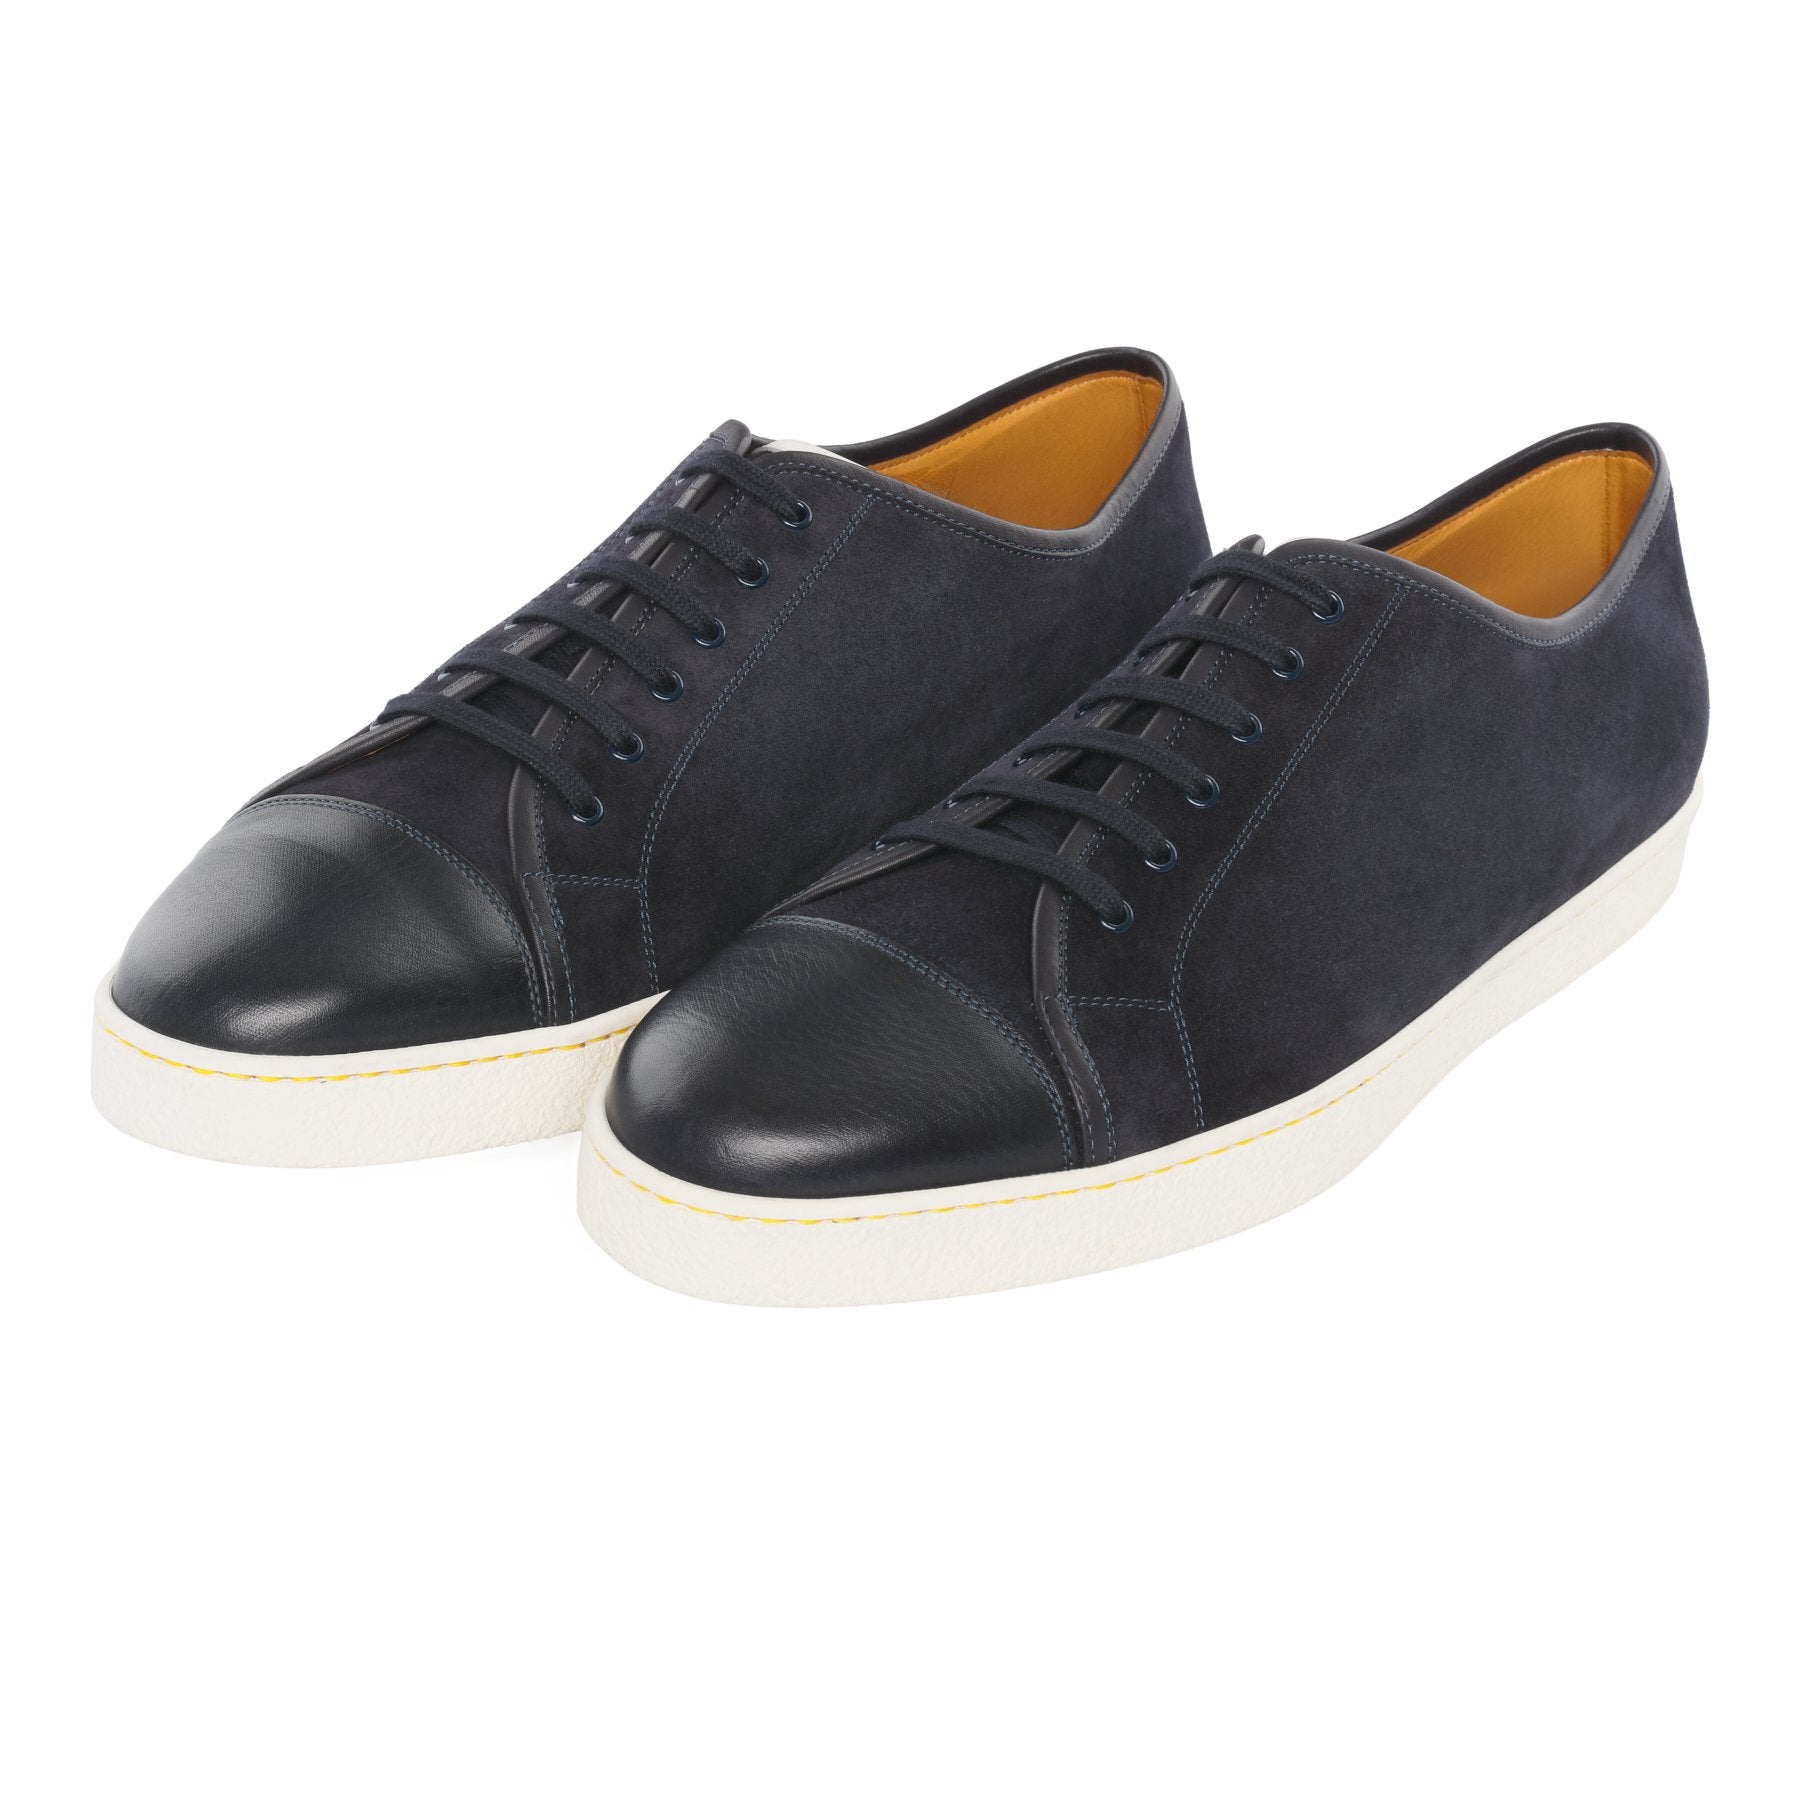 "Levah" Suede and Leather Sneakers in Dark Blue